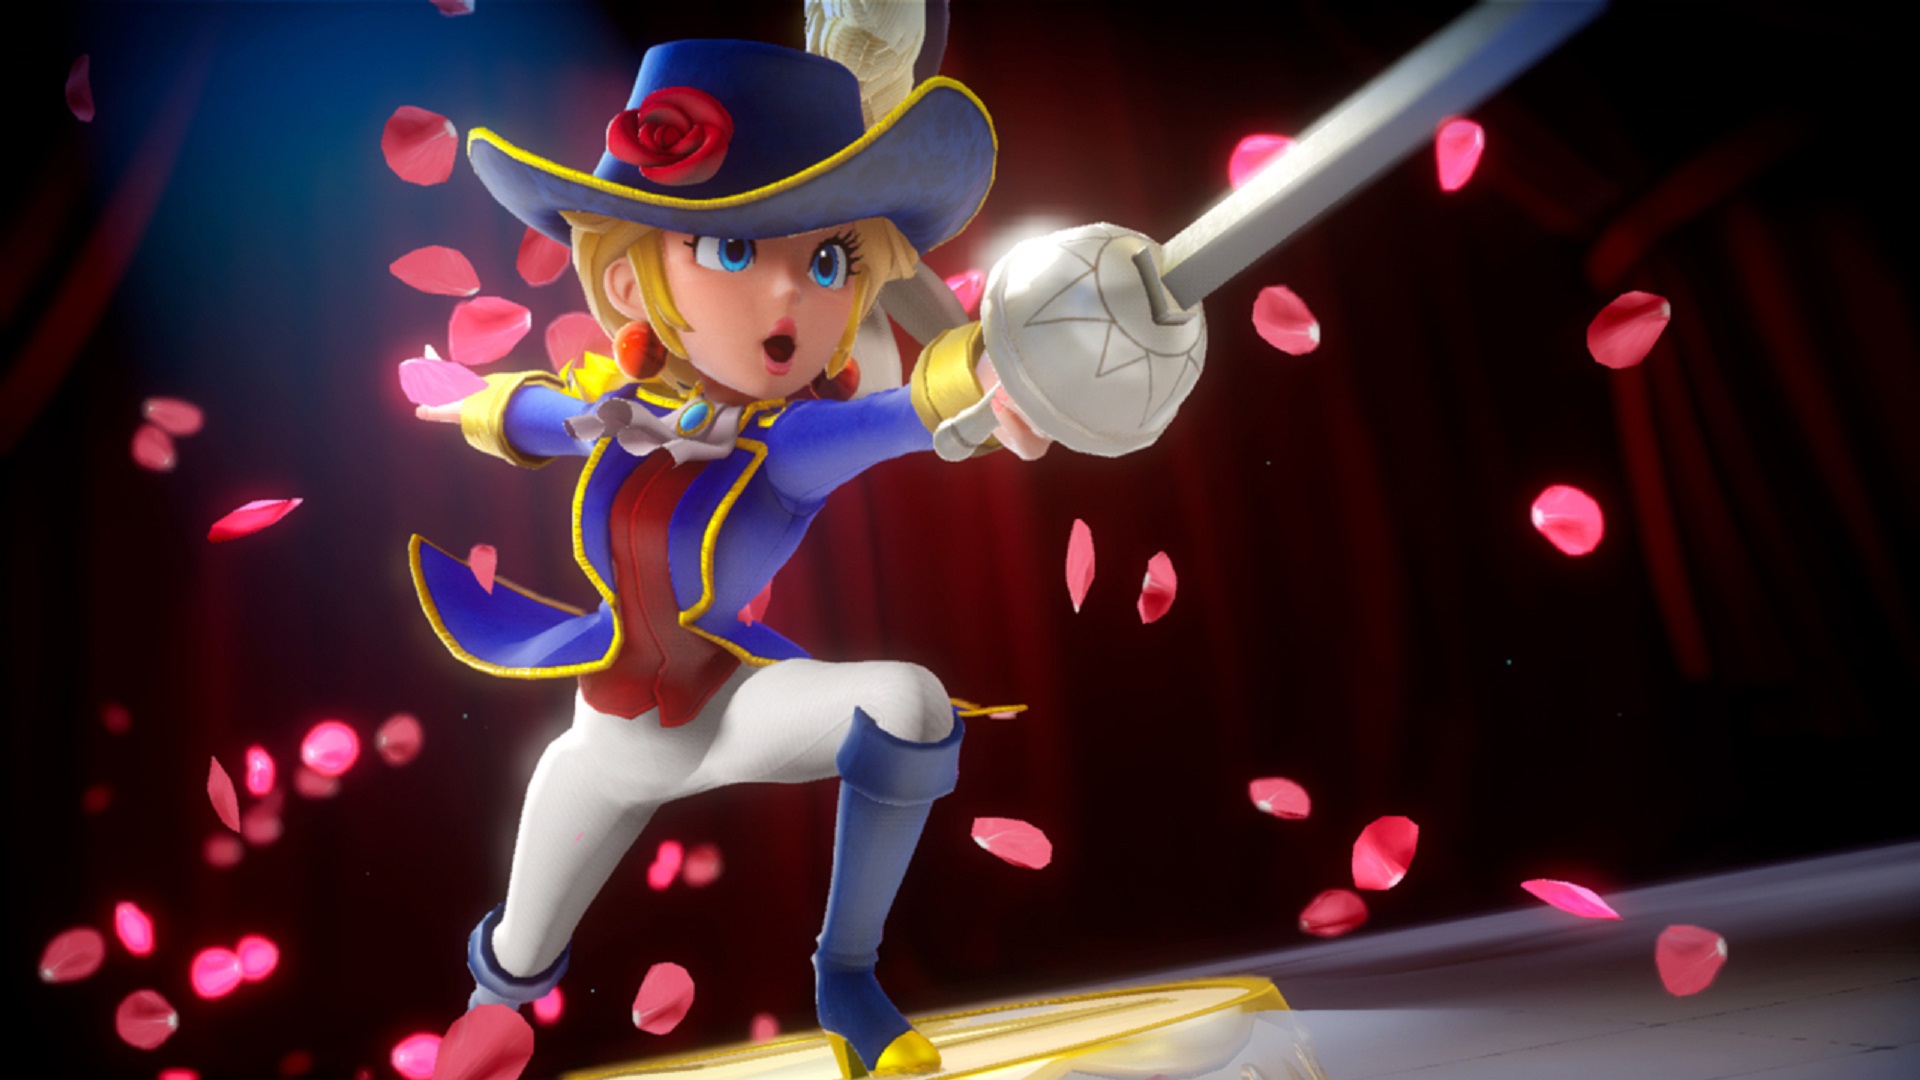 Princess Peach: Showtime! Sets the stage for a wonderful action